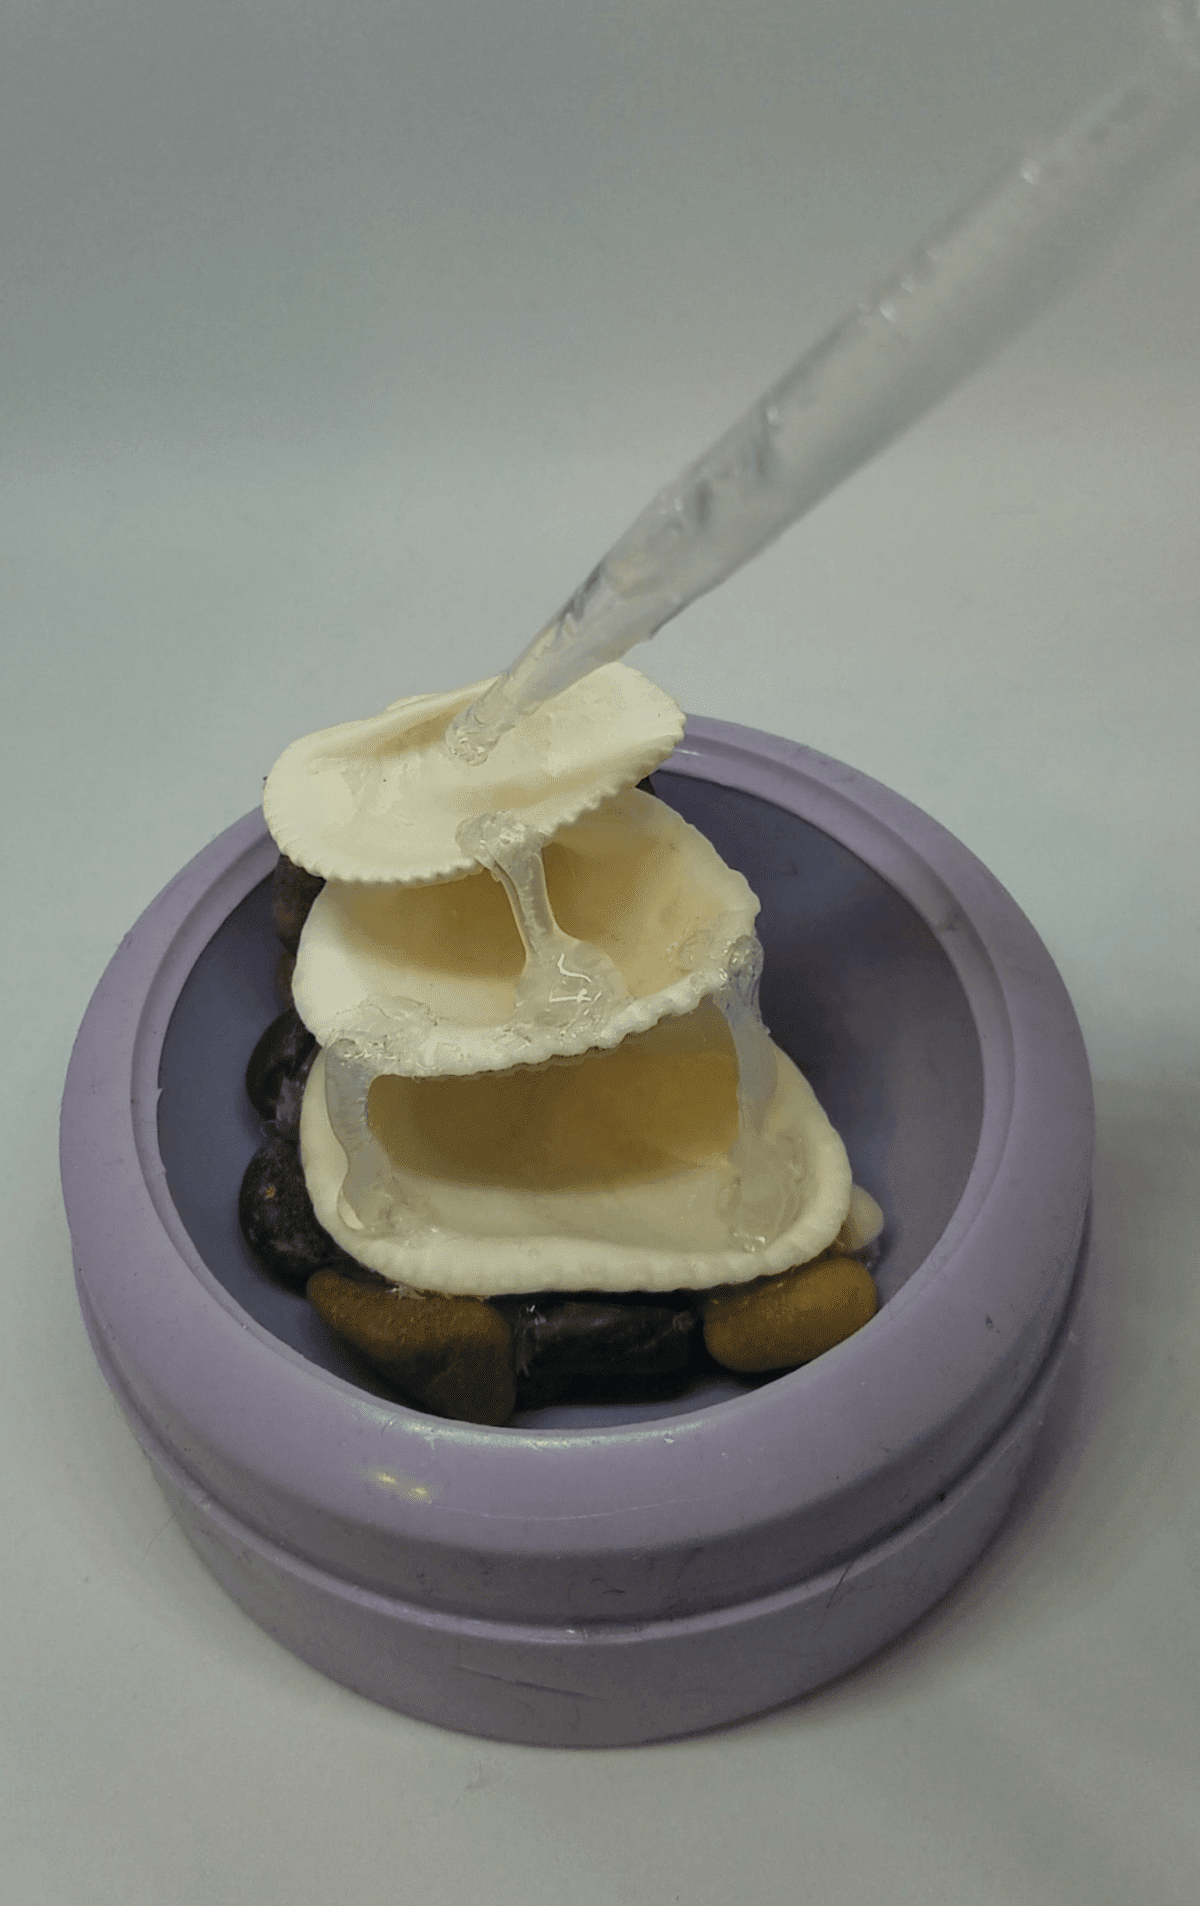 adding resin with a pipette